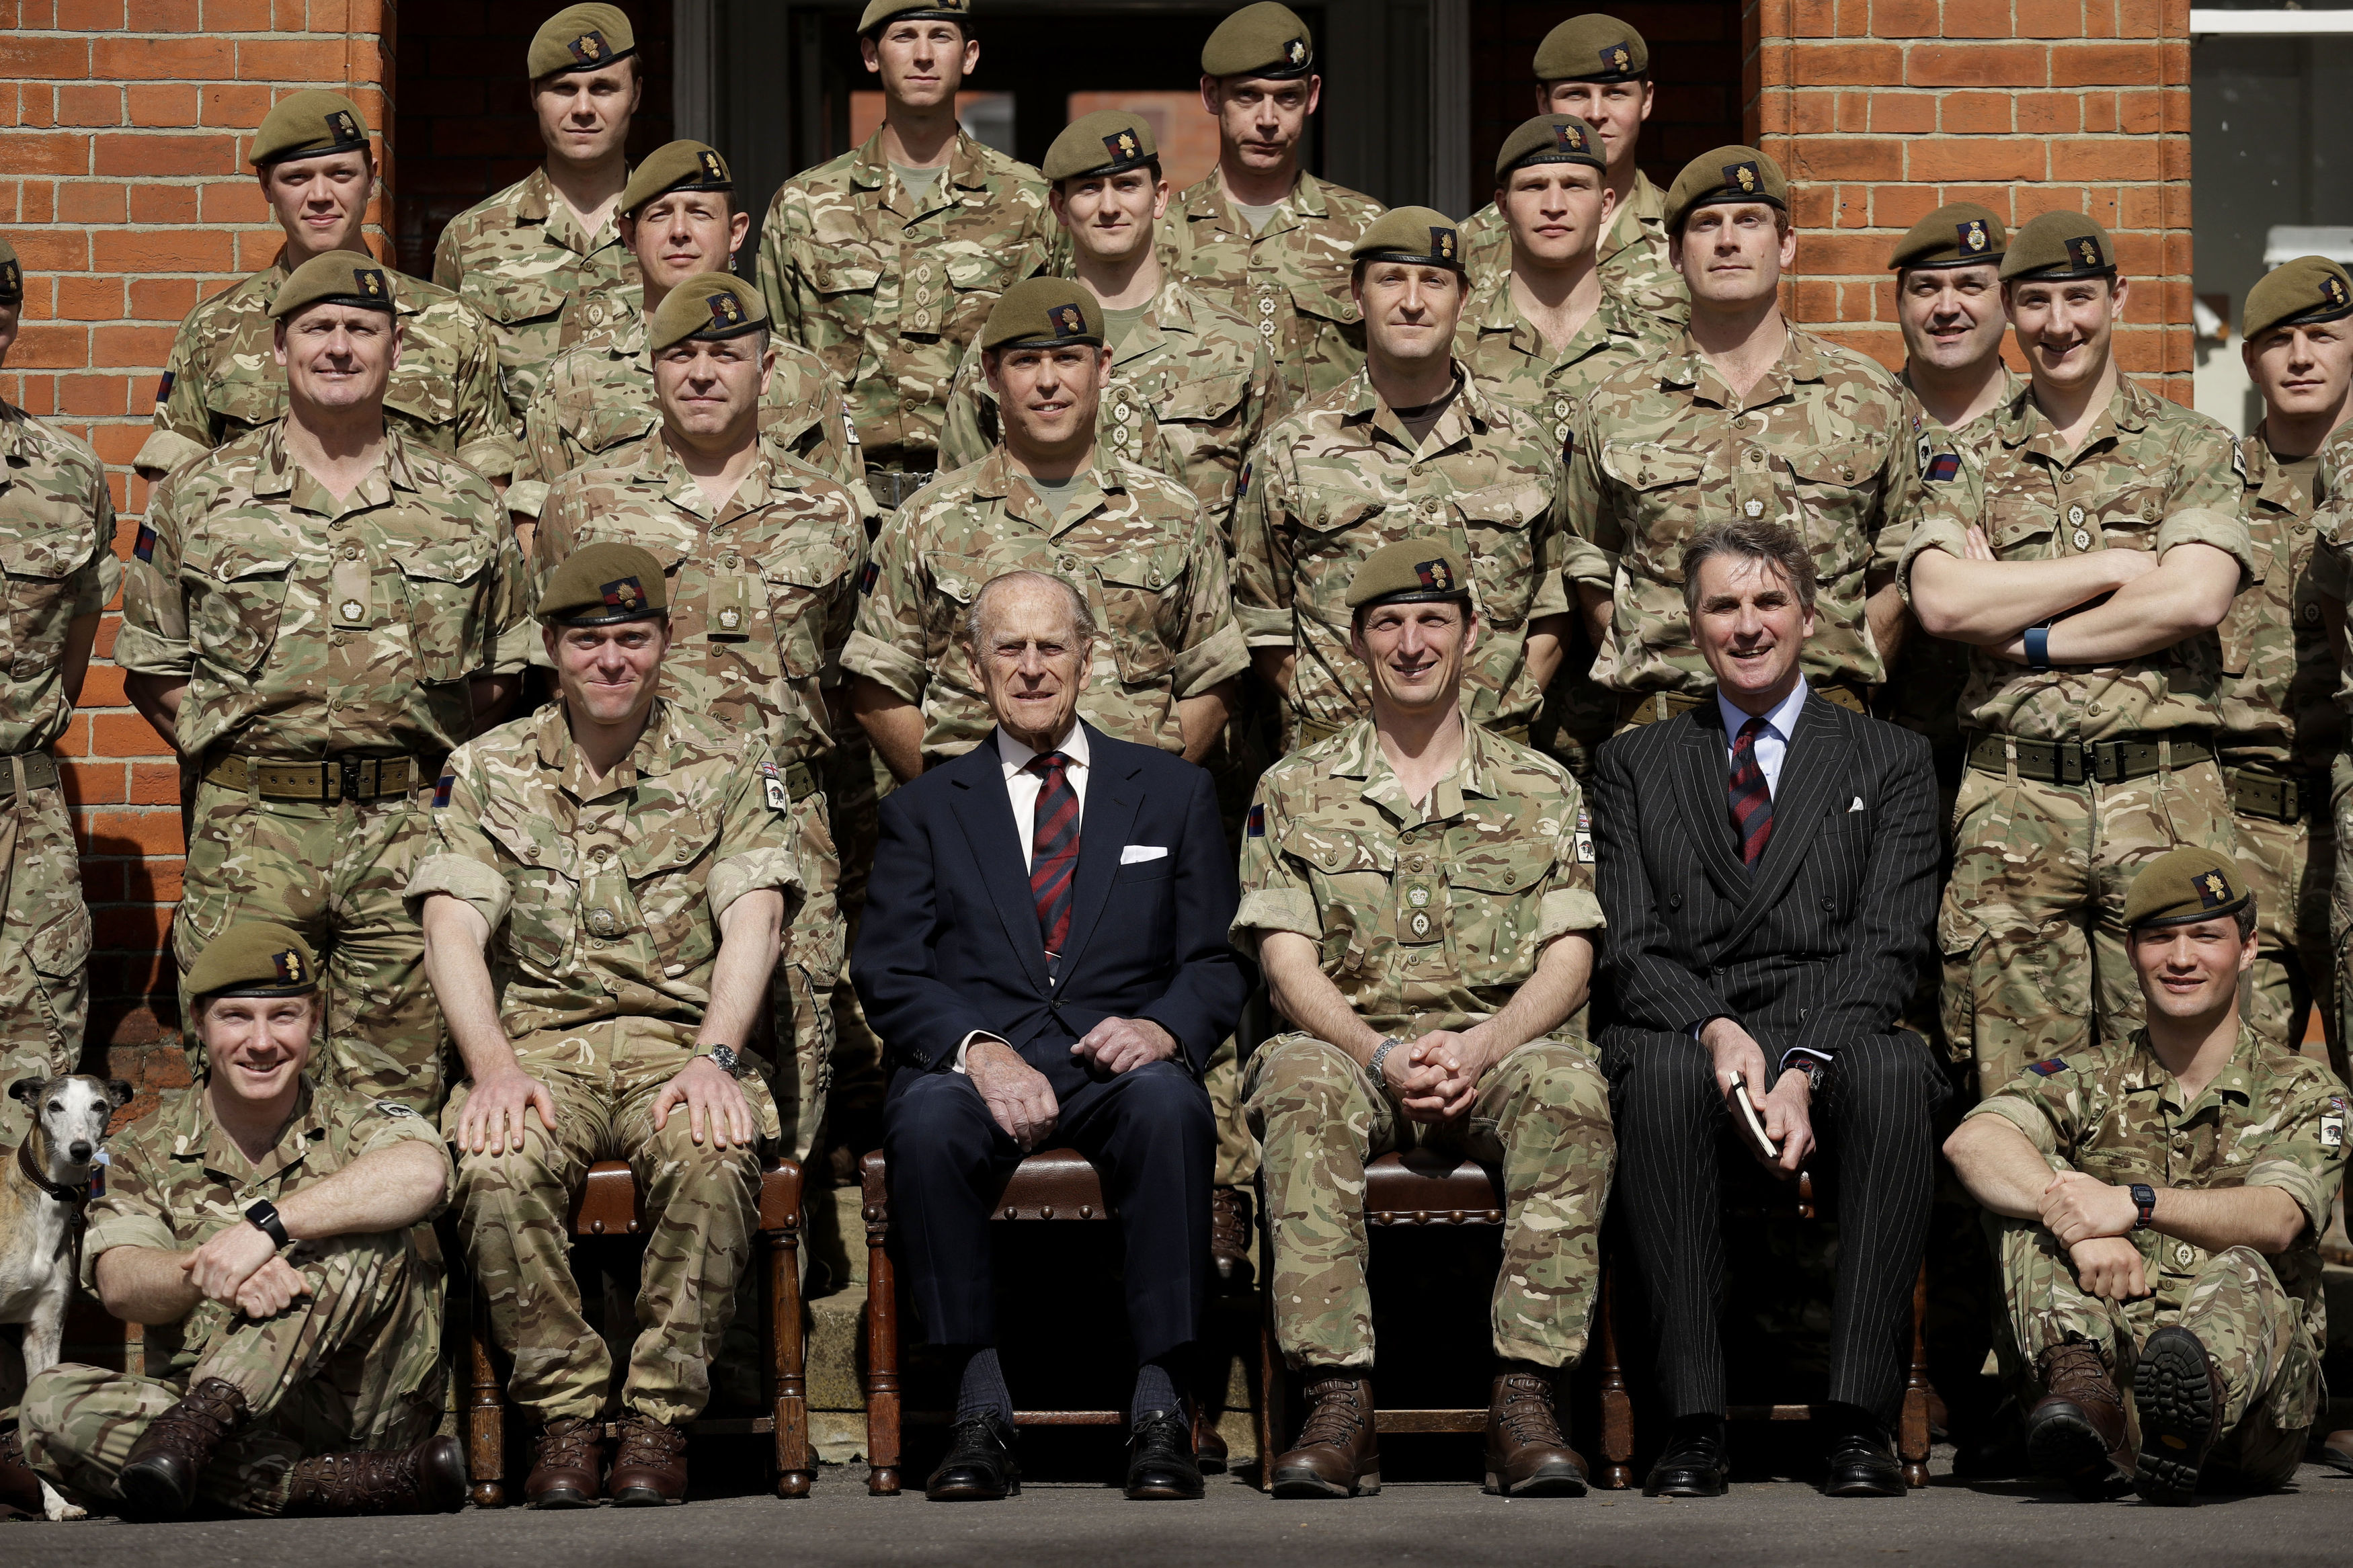 The Duke of Edinburgh poses for a group photo with the Grenadier Guards